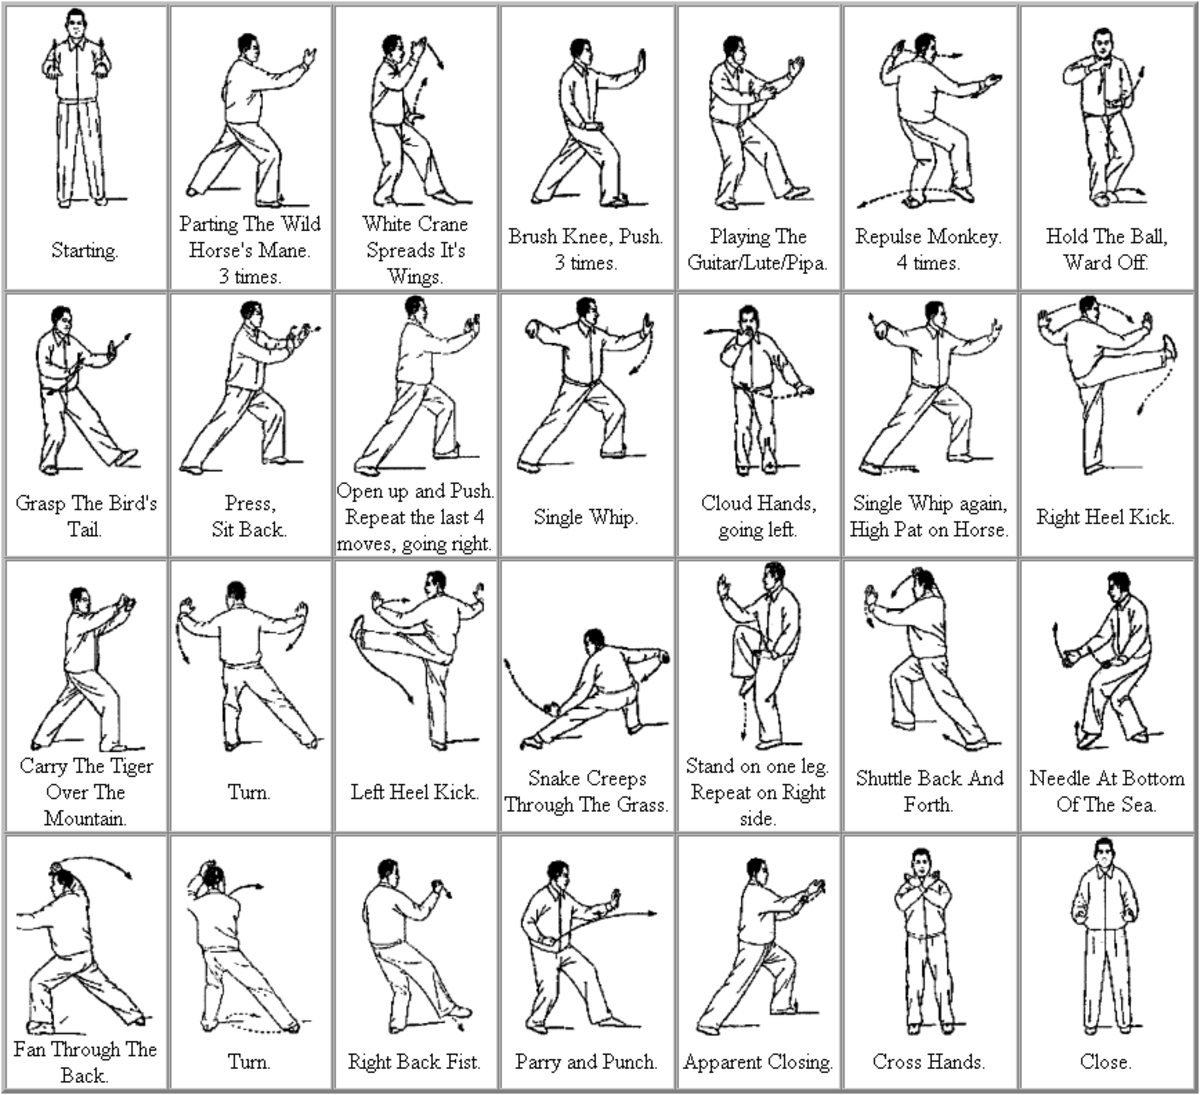 This chart shows the 24 basic movements of Tai Chi.